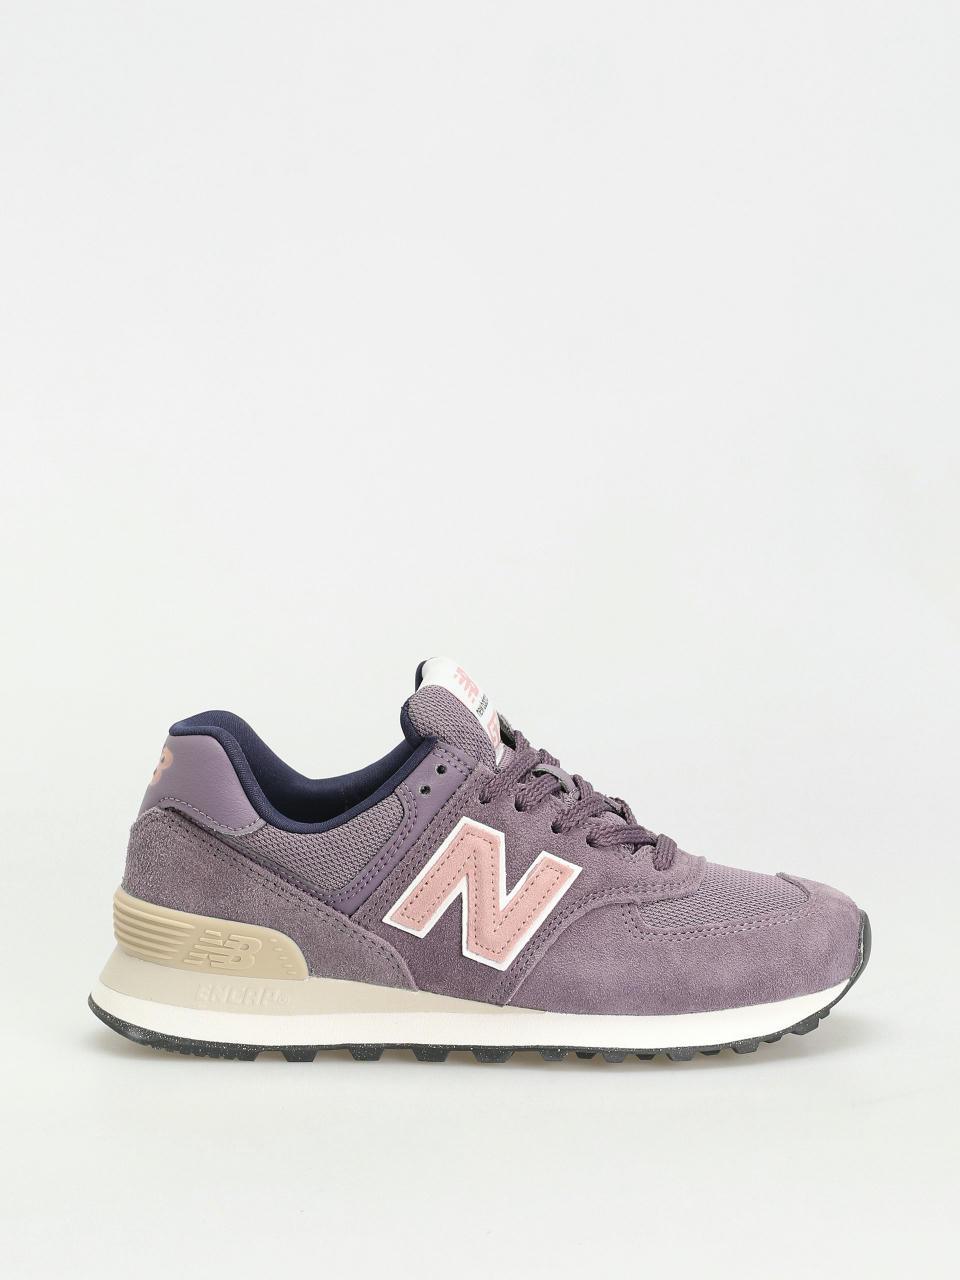 New Balance 574 Shoes Wmn (shadow)